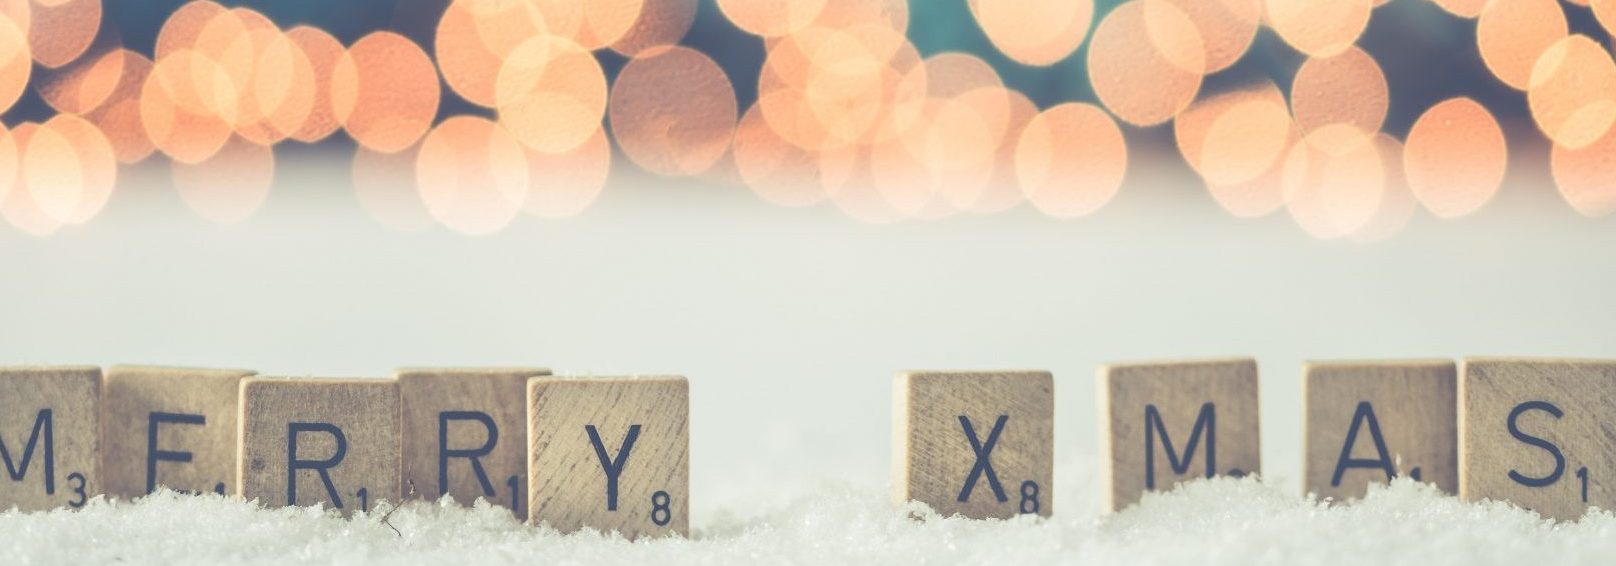 Merry Christmas Scrabble letters